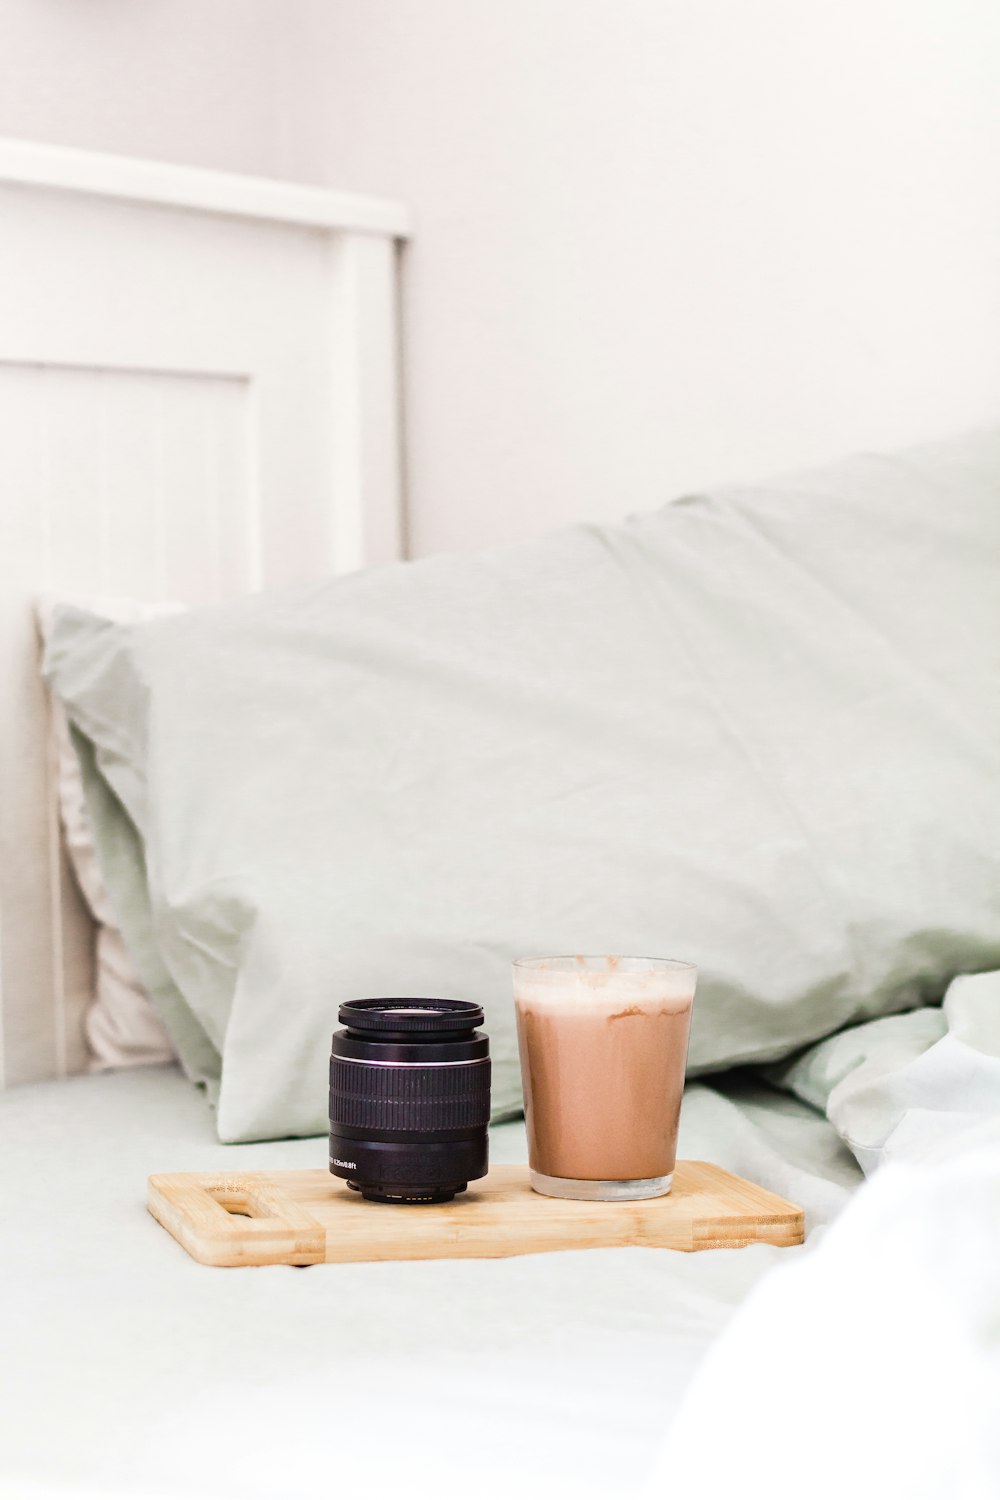 black and brown coffee cup on brown wooden table